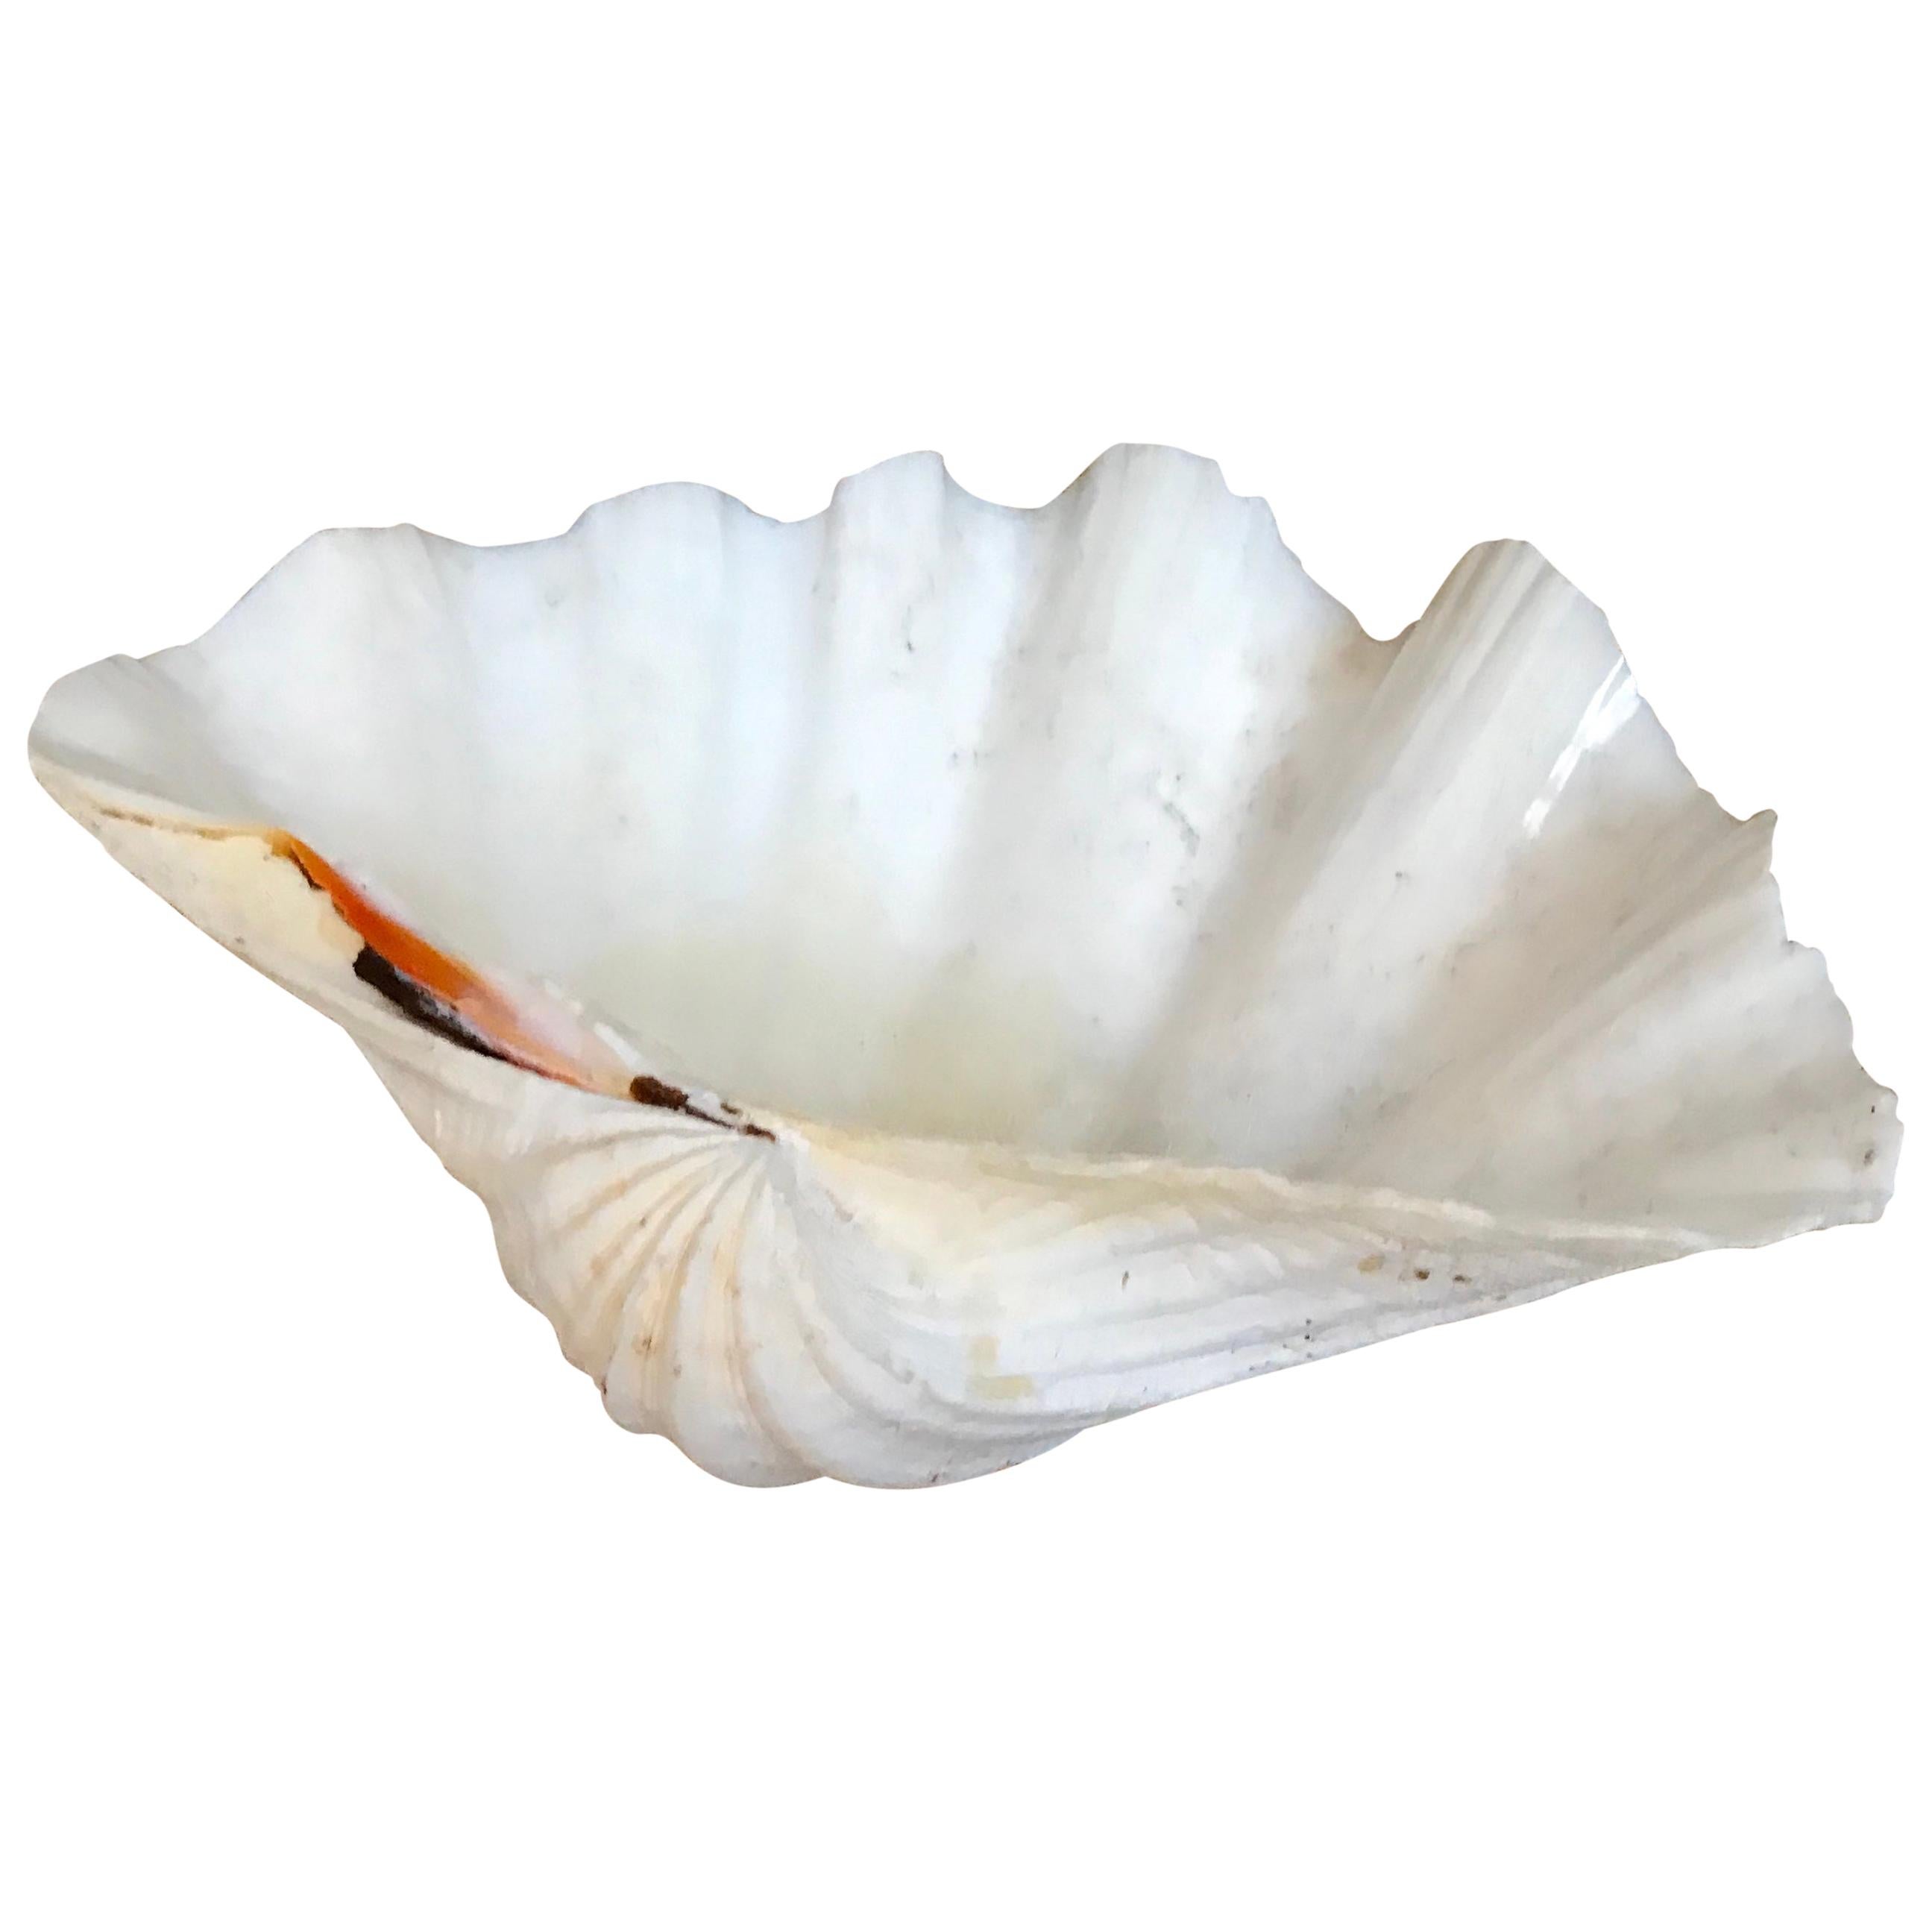 Rare Truly Giant Clam Shell, Tridacna Gigas at 1stDibs  tridacna gigas  shell, giant clamshell, open clam shell